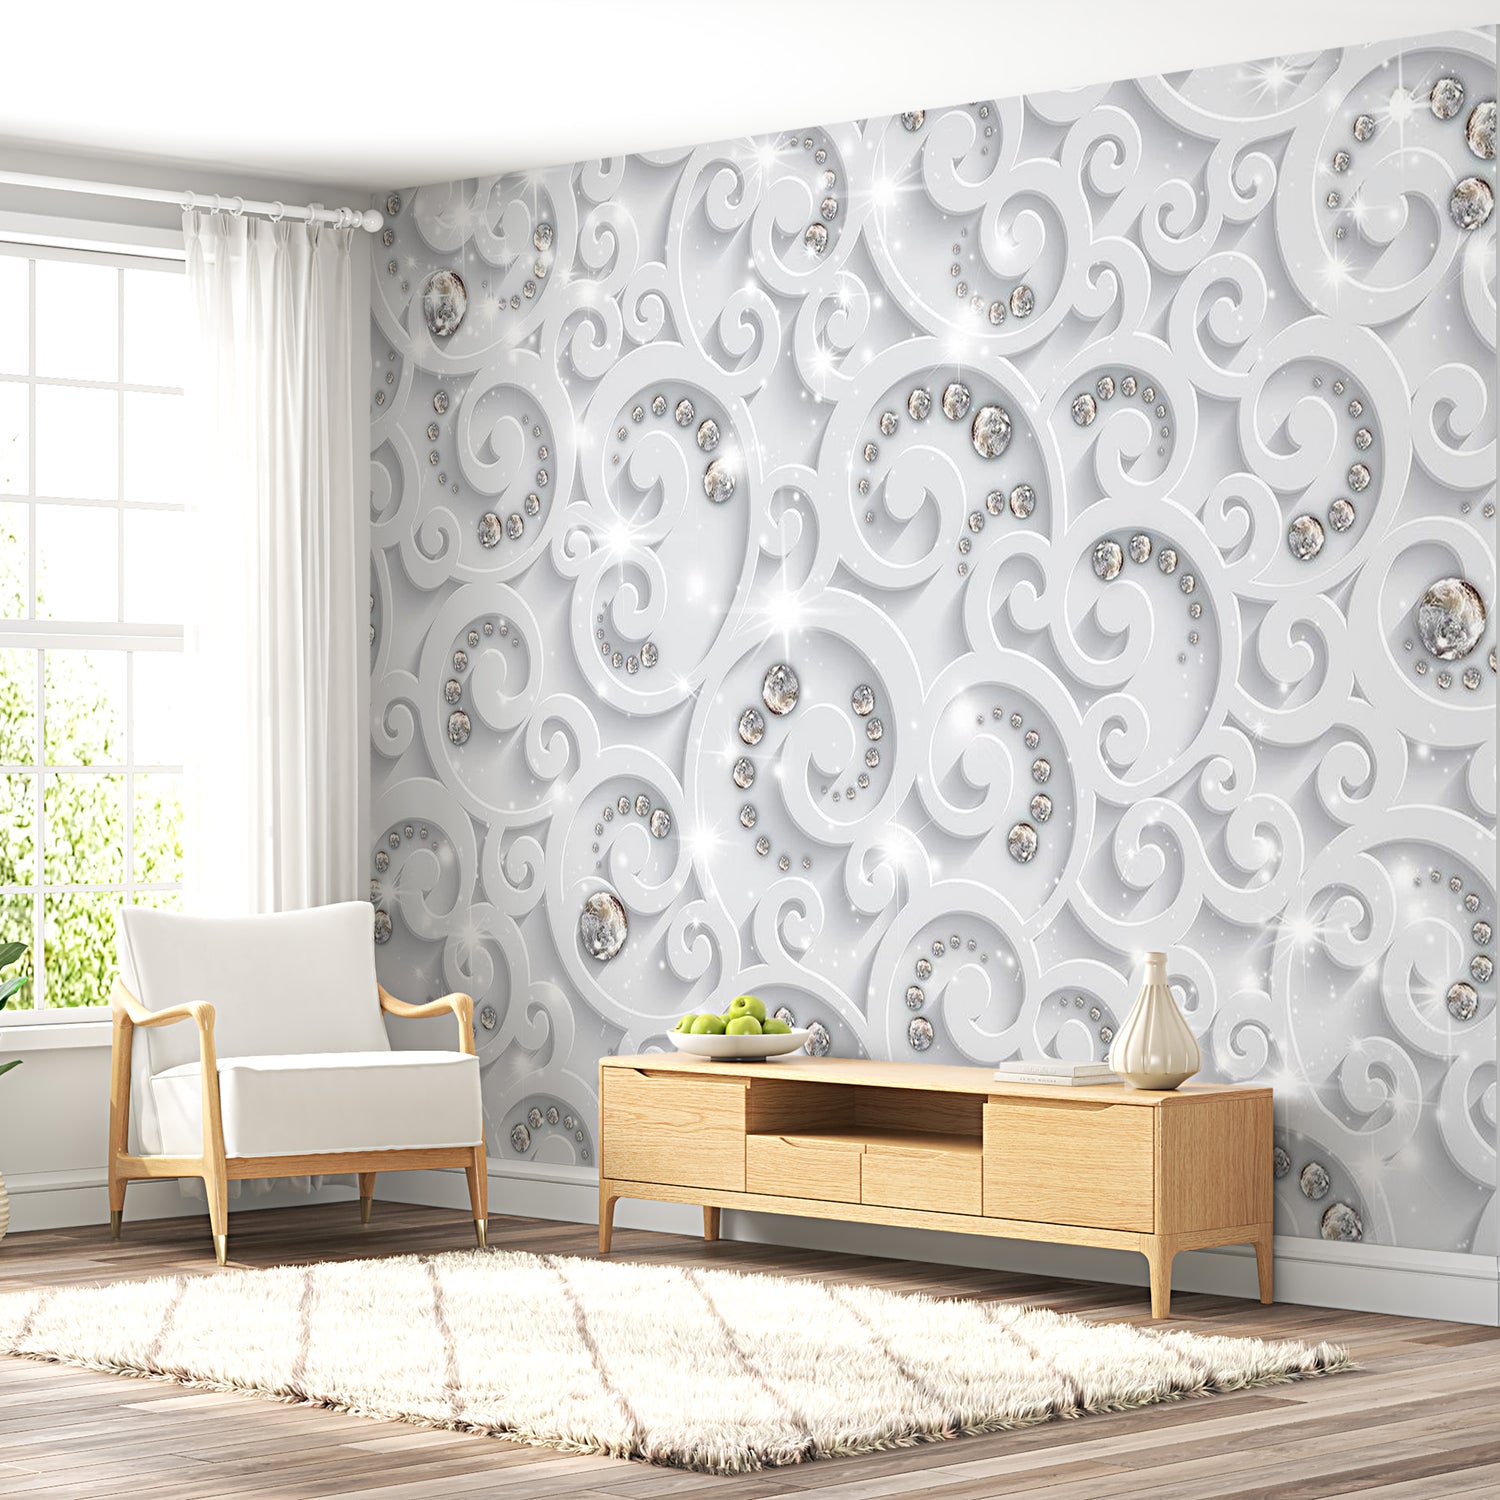 Peel & Stick Glam Wall Mural - Abstract Glamor - Removable Wall Decals